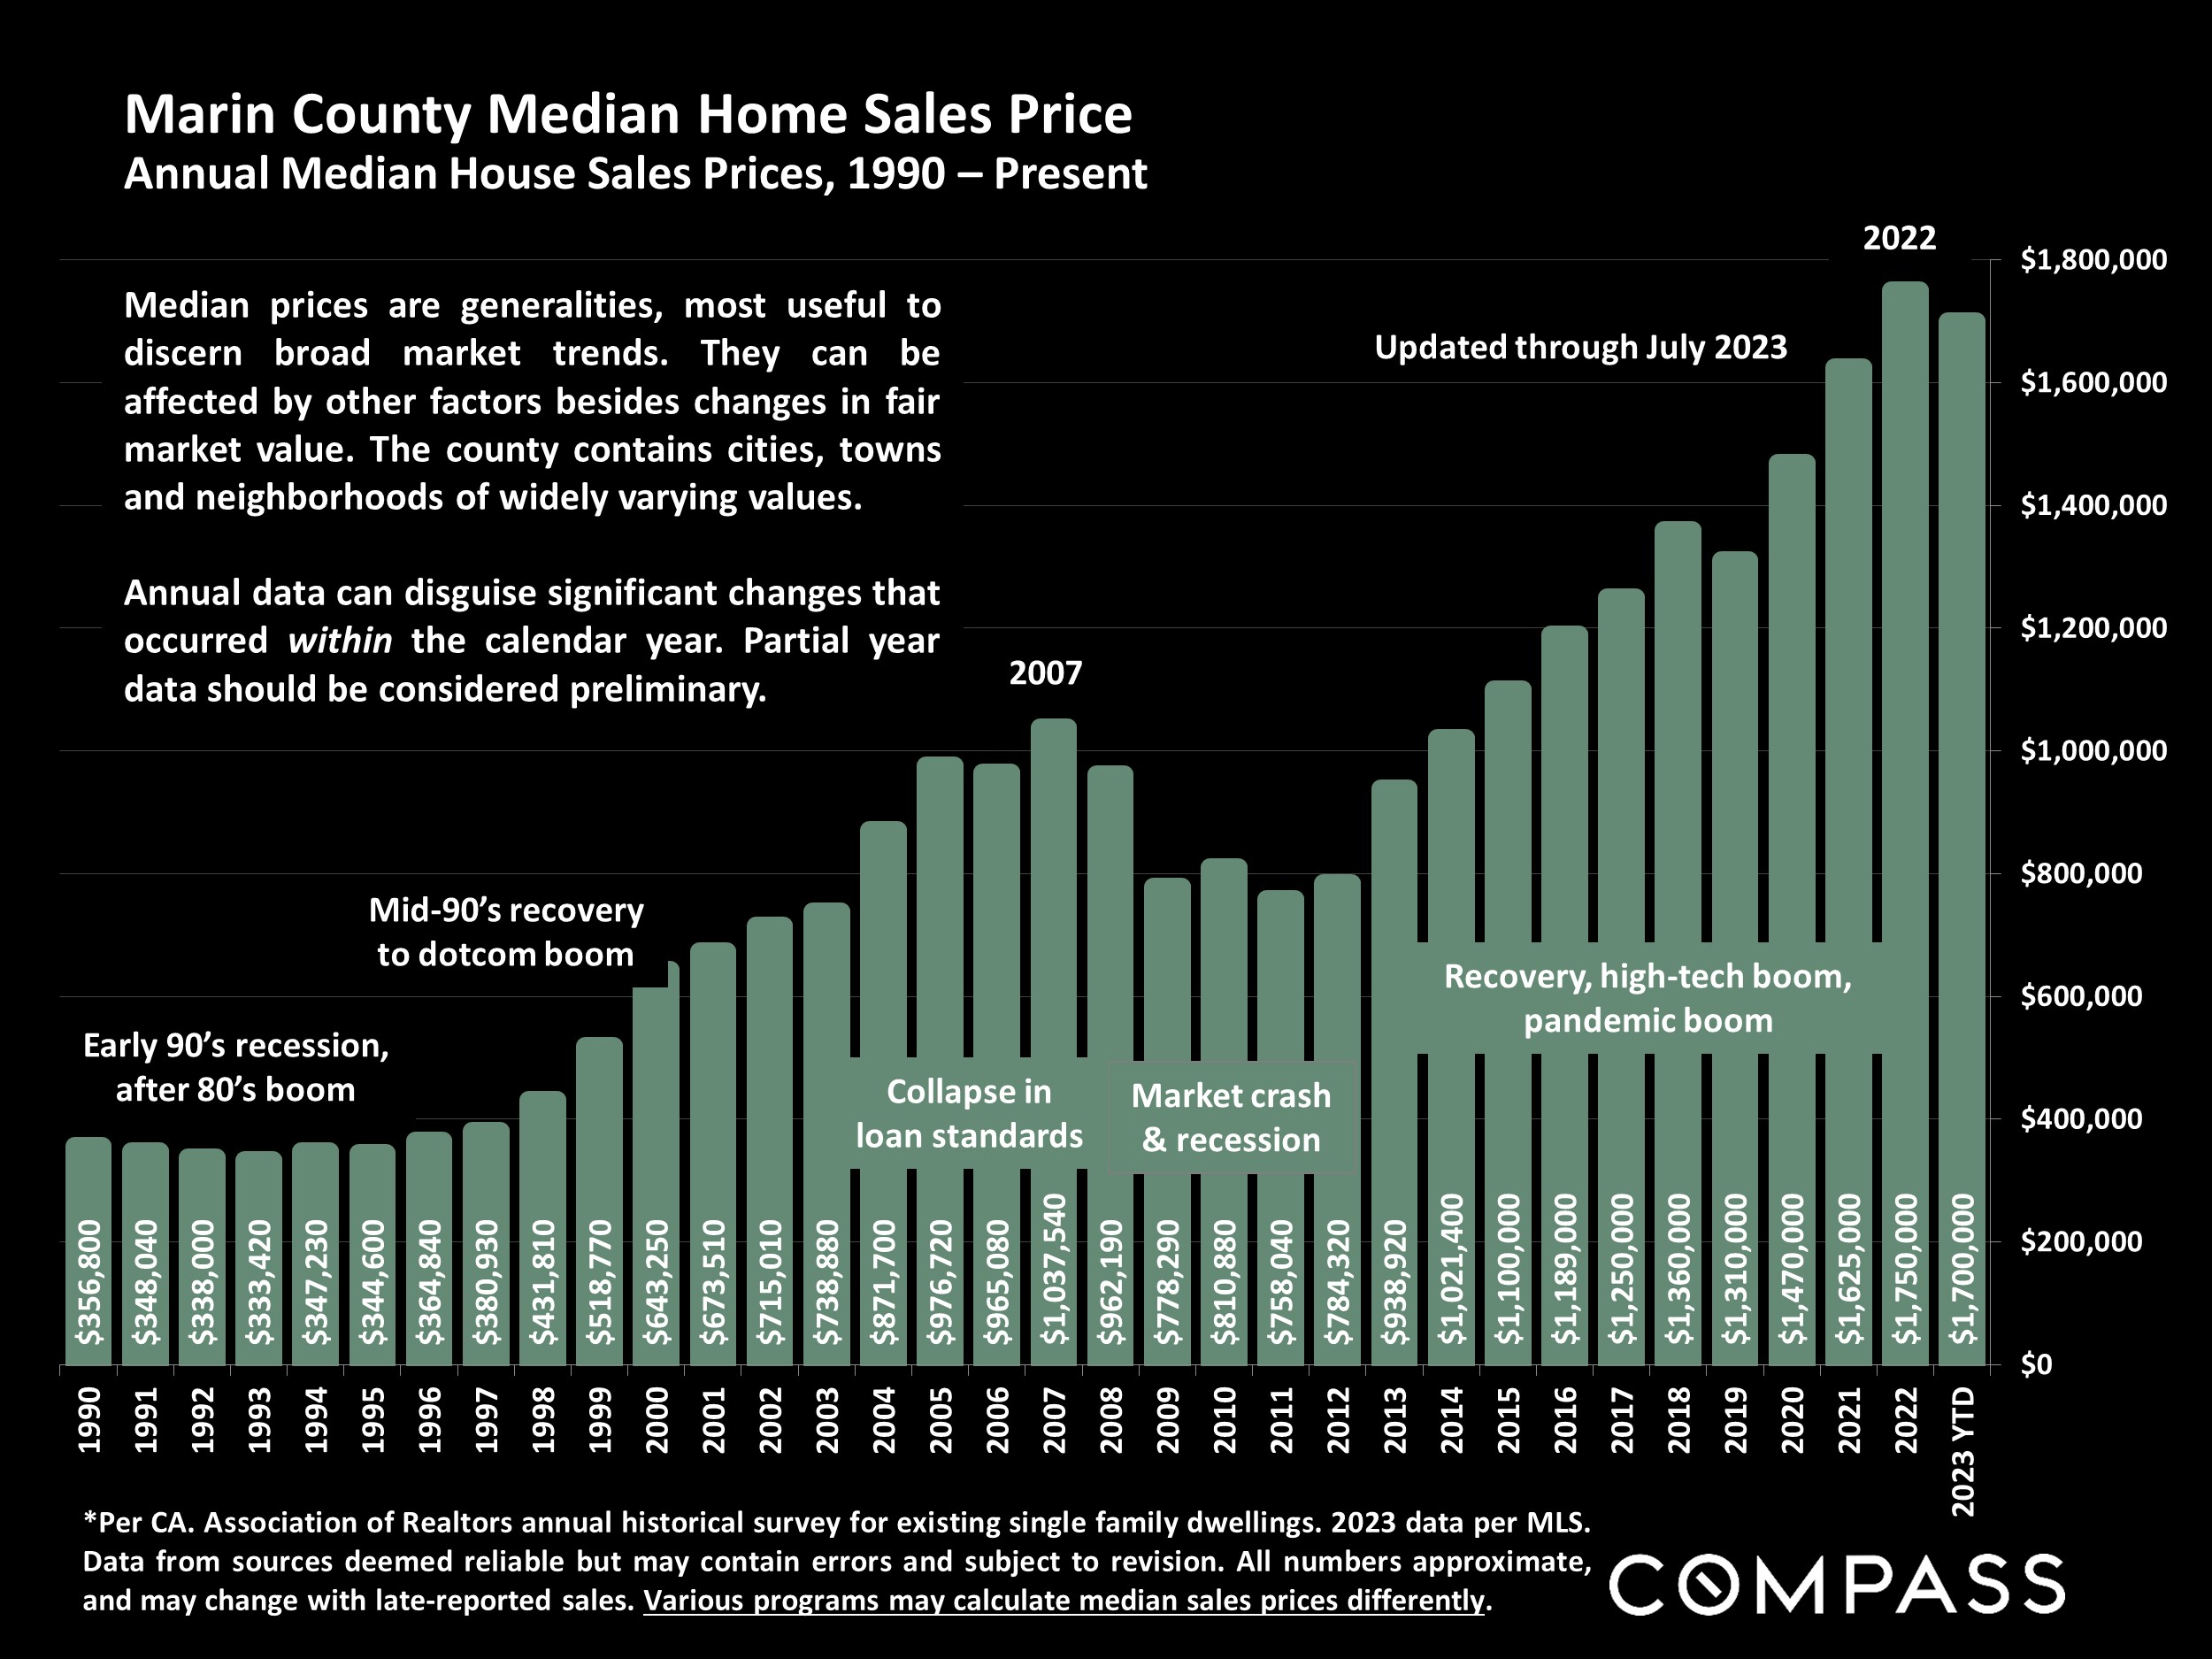 Marin County Median Home Sales Price